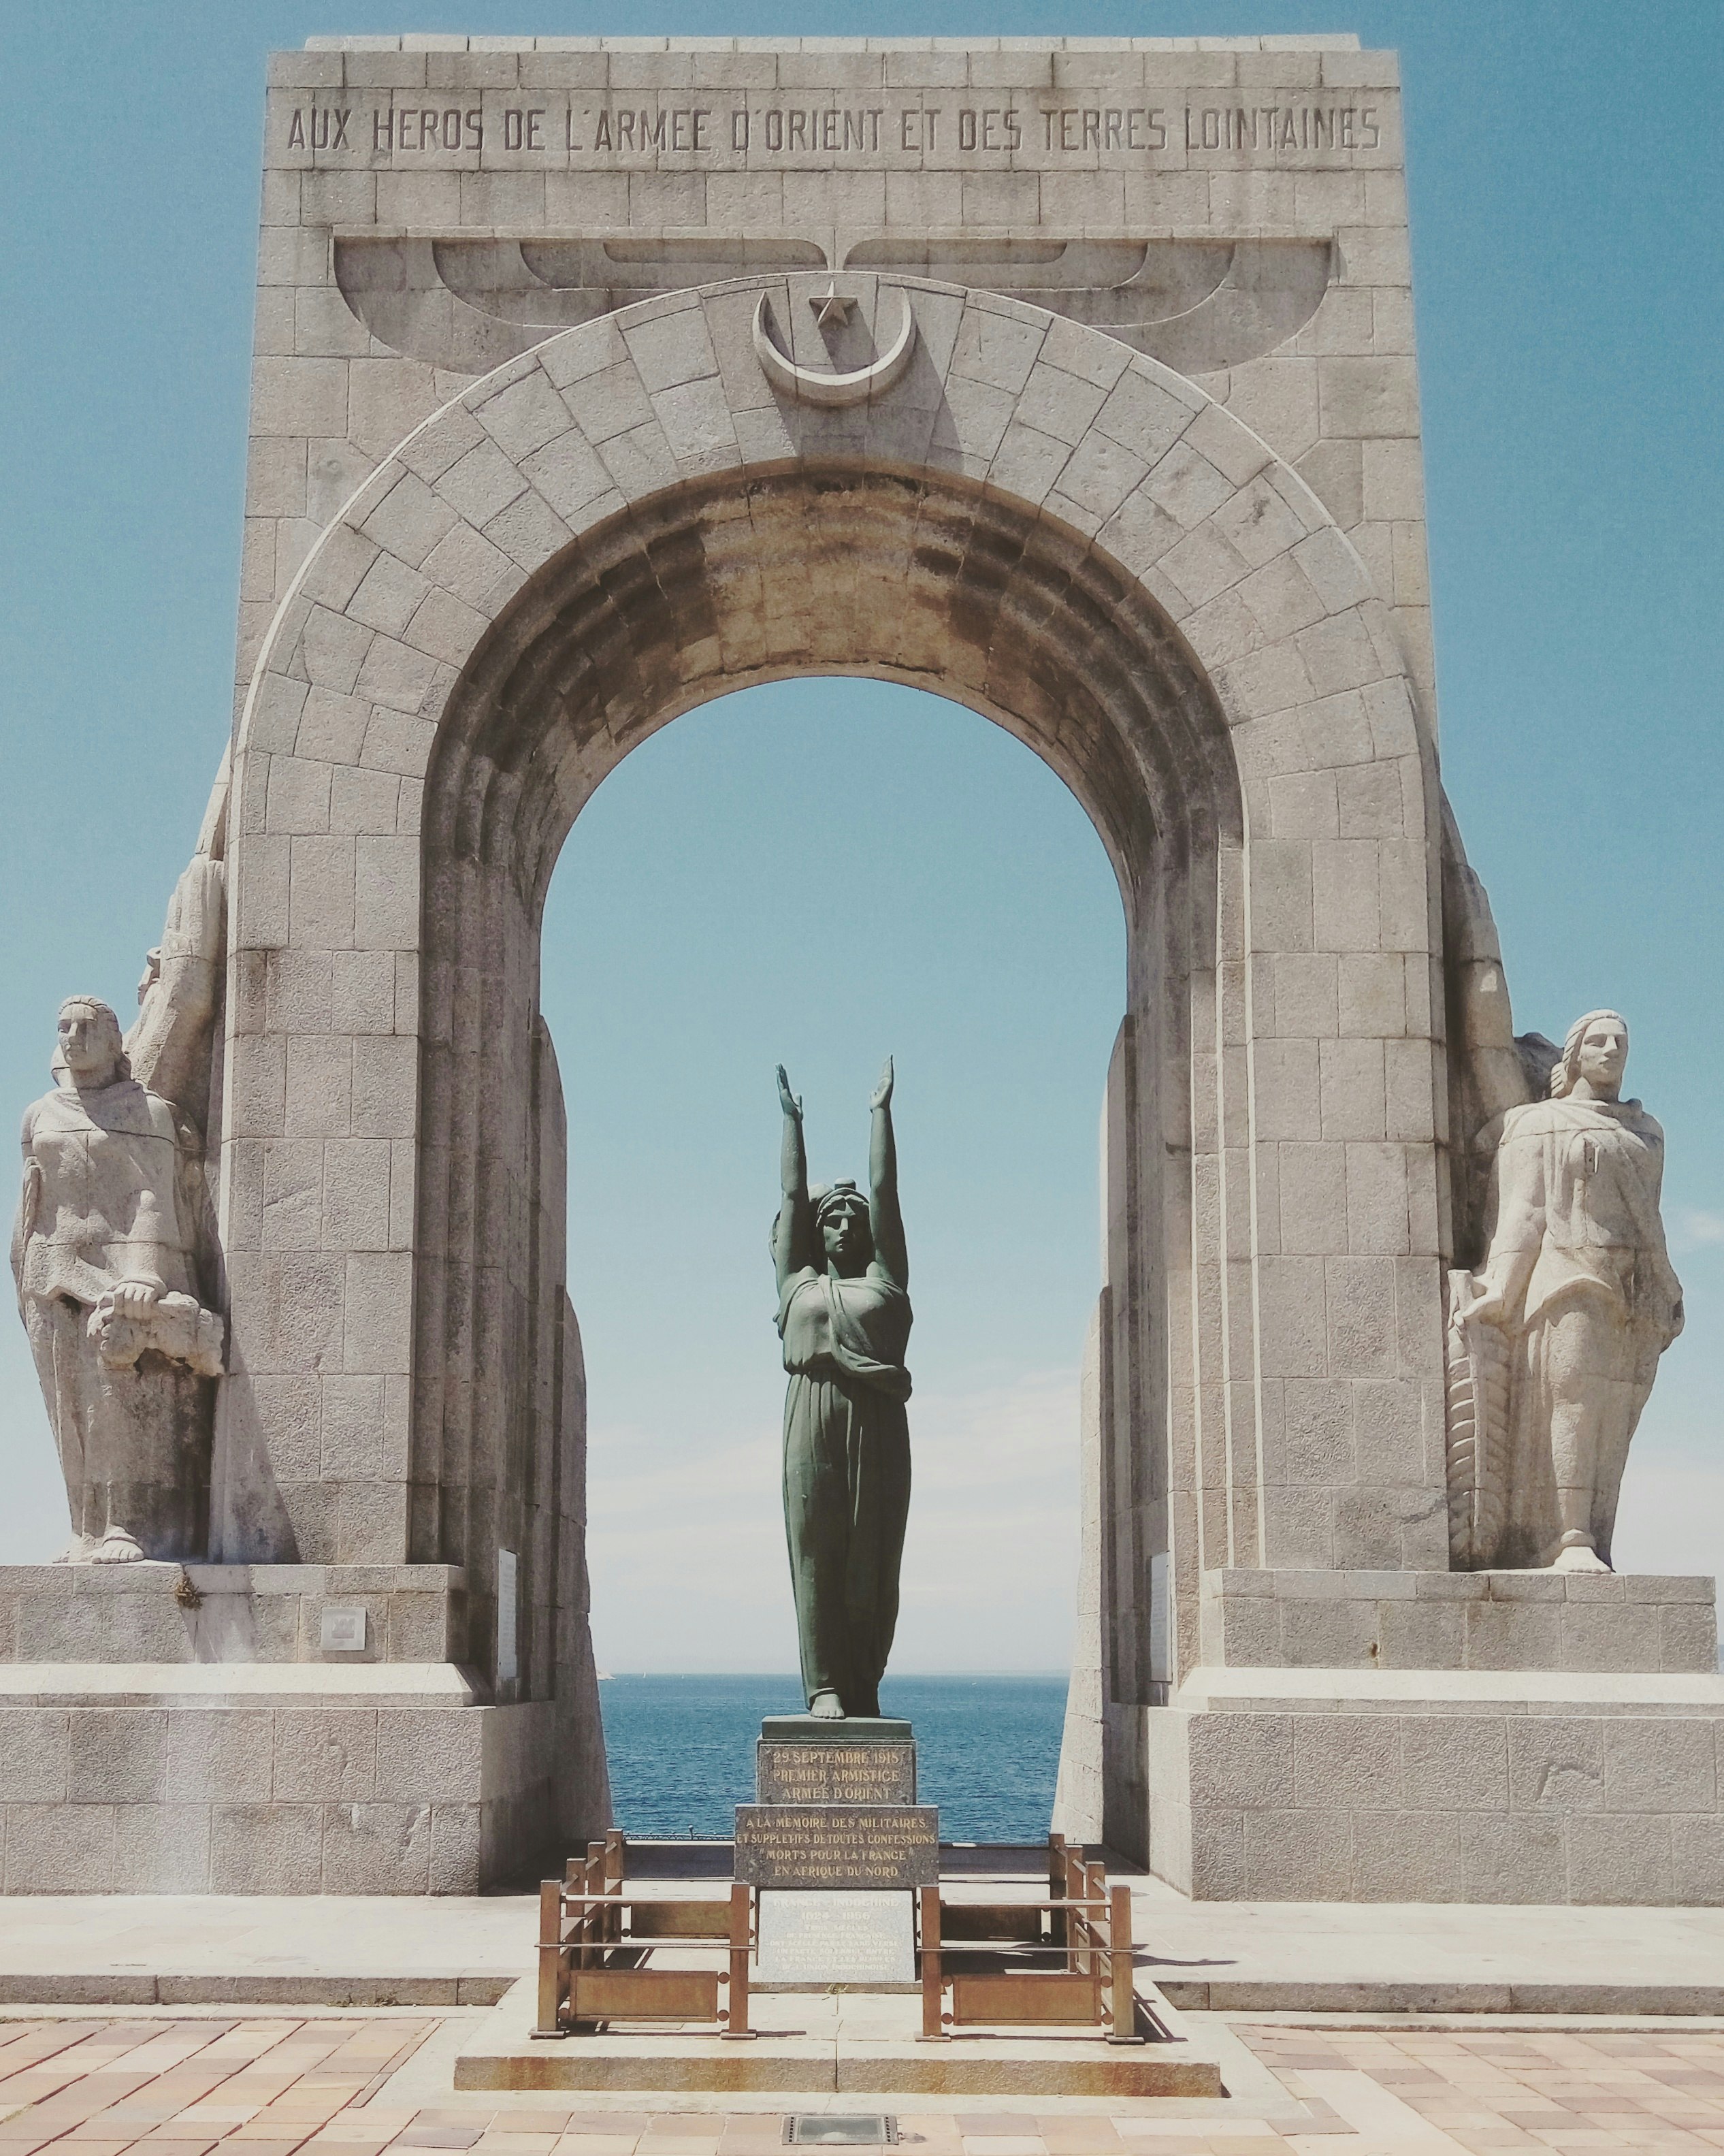 The Porte d’Orient, or The Oriental Door) - represents the thousands of French-African Colonial soldiers who left from the shores of Marseille to fight in the the Orient during World War I. 

This marked an important and significant moment in my journey through and across Europe on my bike. I had just cycled the length of France, and subsequently collapsed in an exhausted heap infront of the arch after I took this photo.